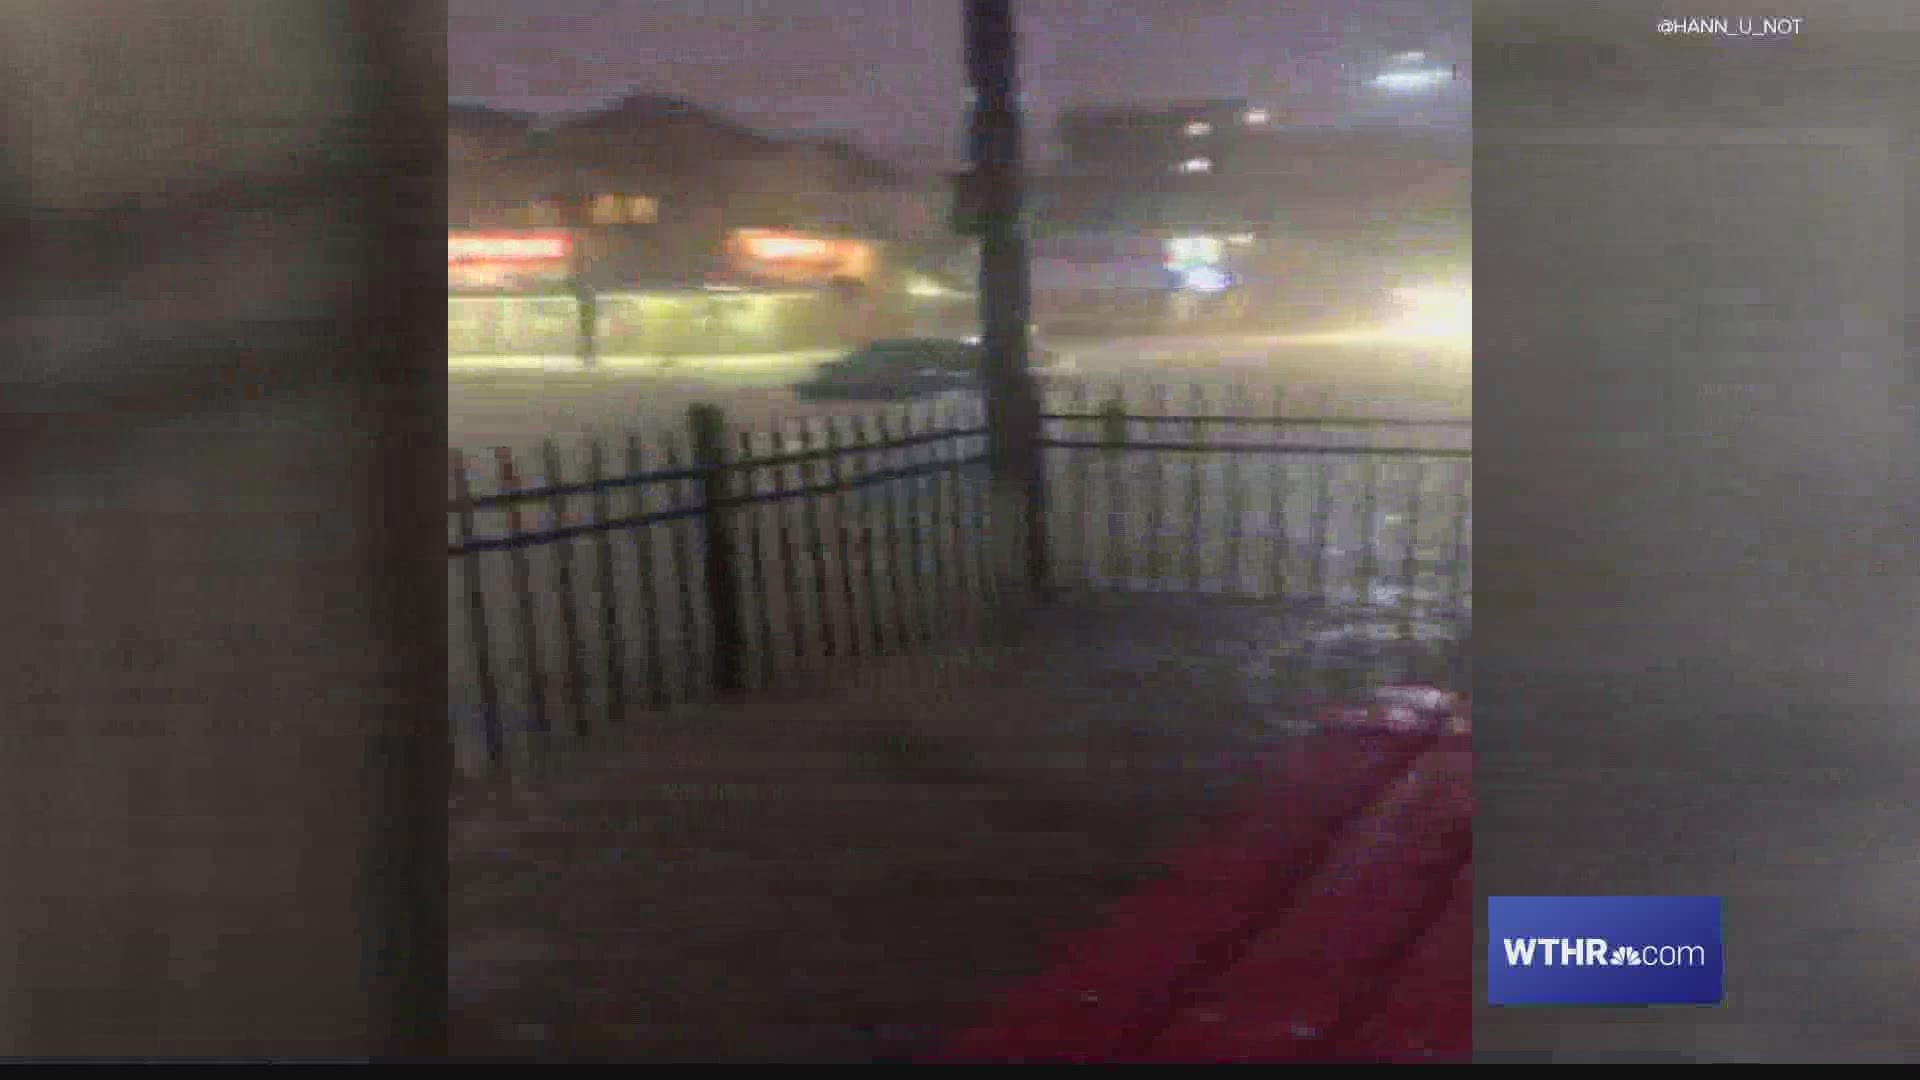 Meteorologist Kelly Greene shares video of flooding near the Indiana University campus as more rain approaches Bloomington early Saturday.